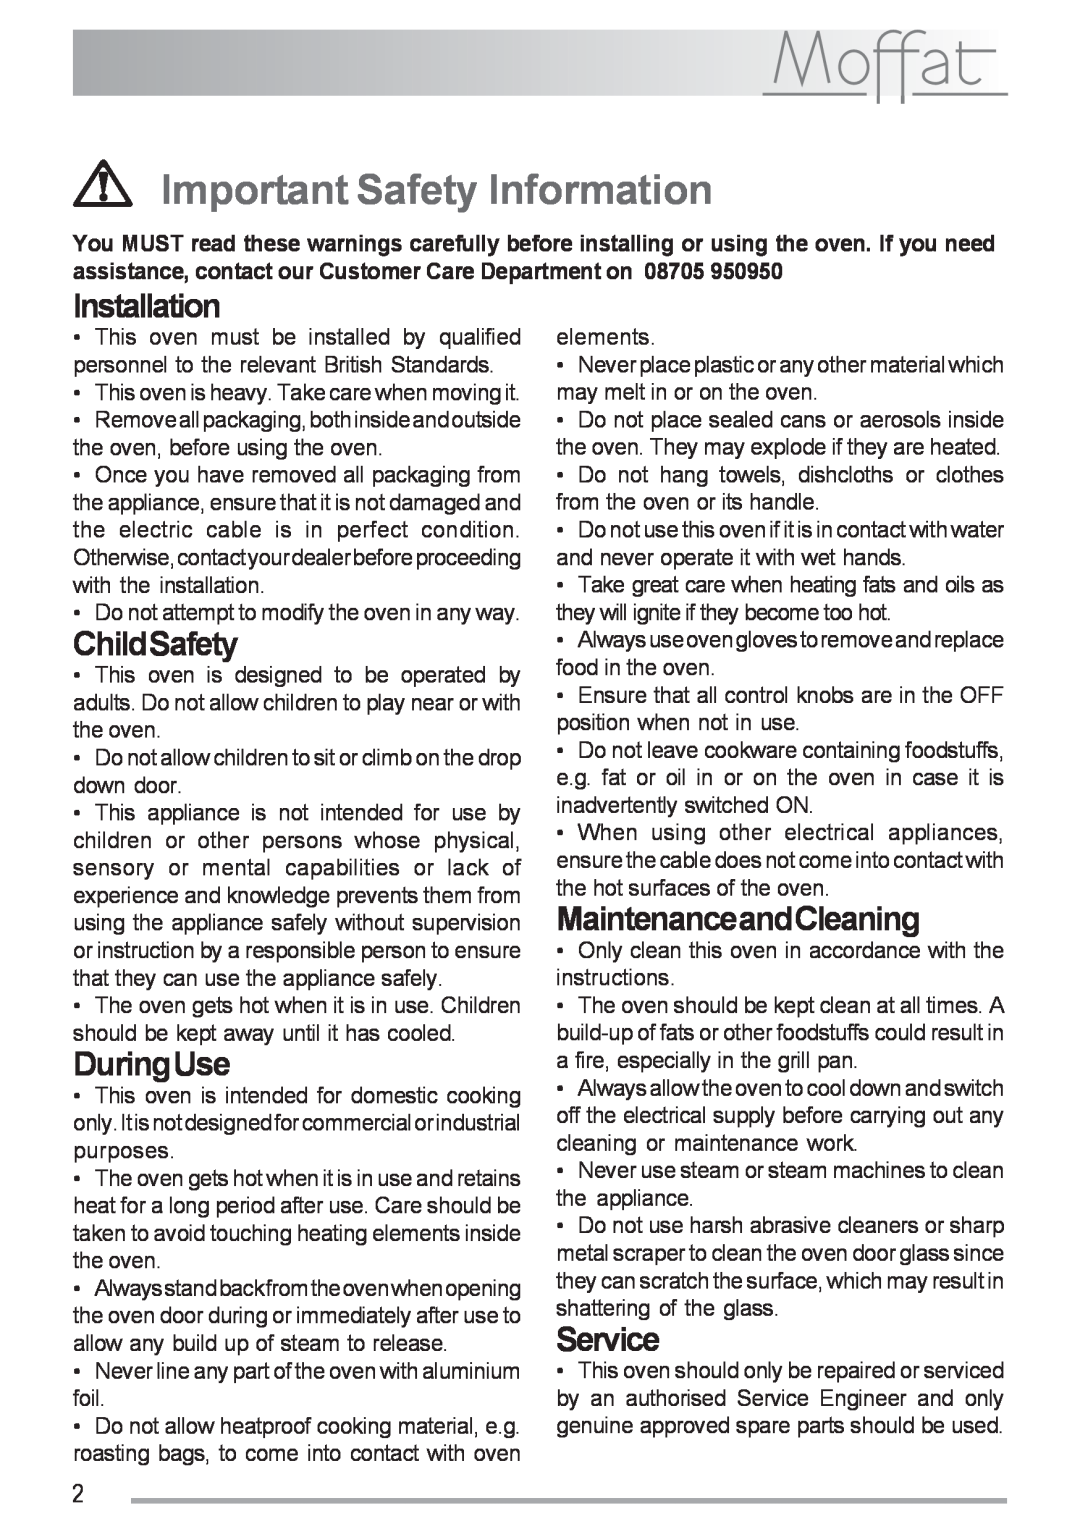 Moffat MSF 611 manual Important Safety Information, Installation, ChildSafety, DuringUse, MaintenanceandCleaning, Service 